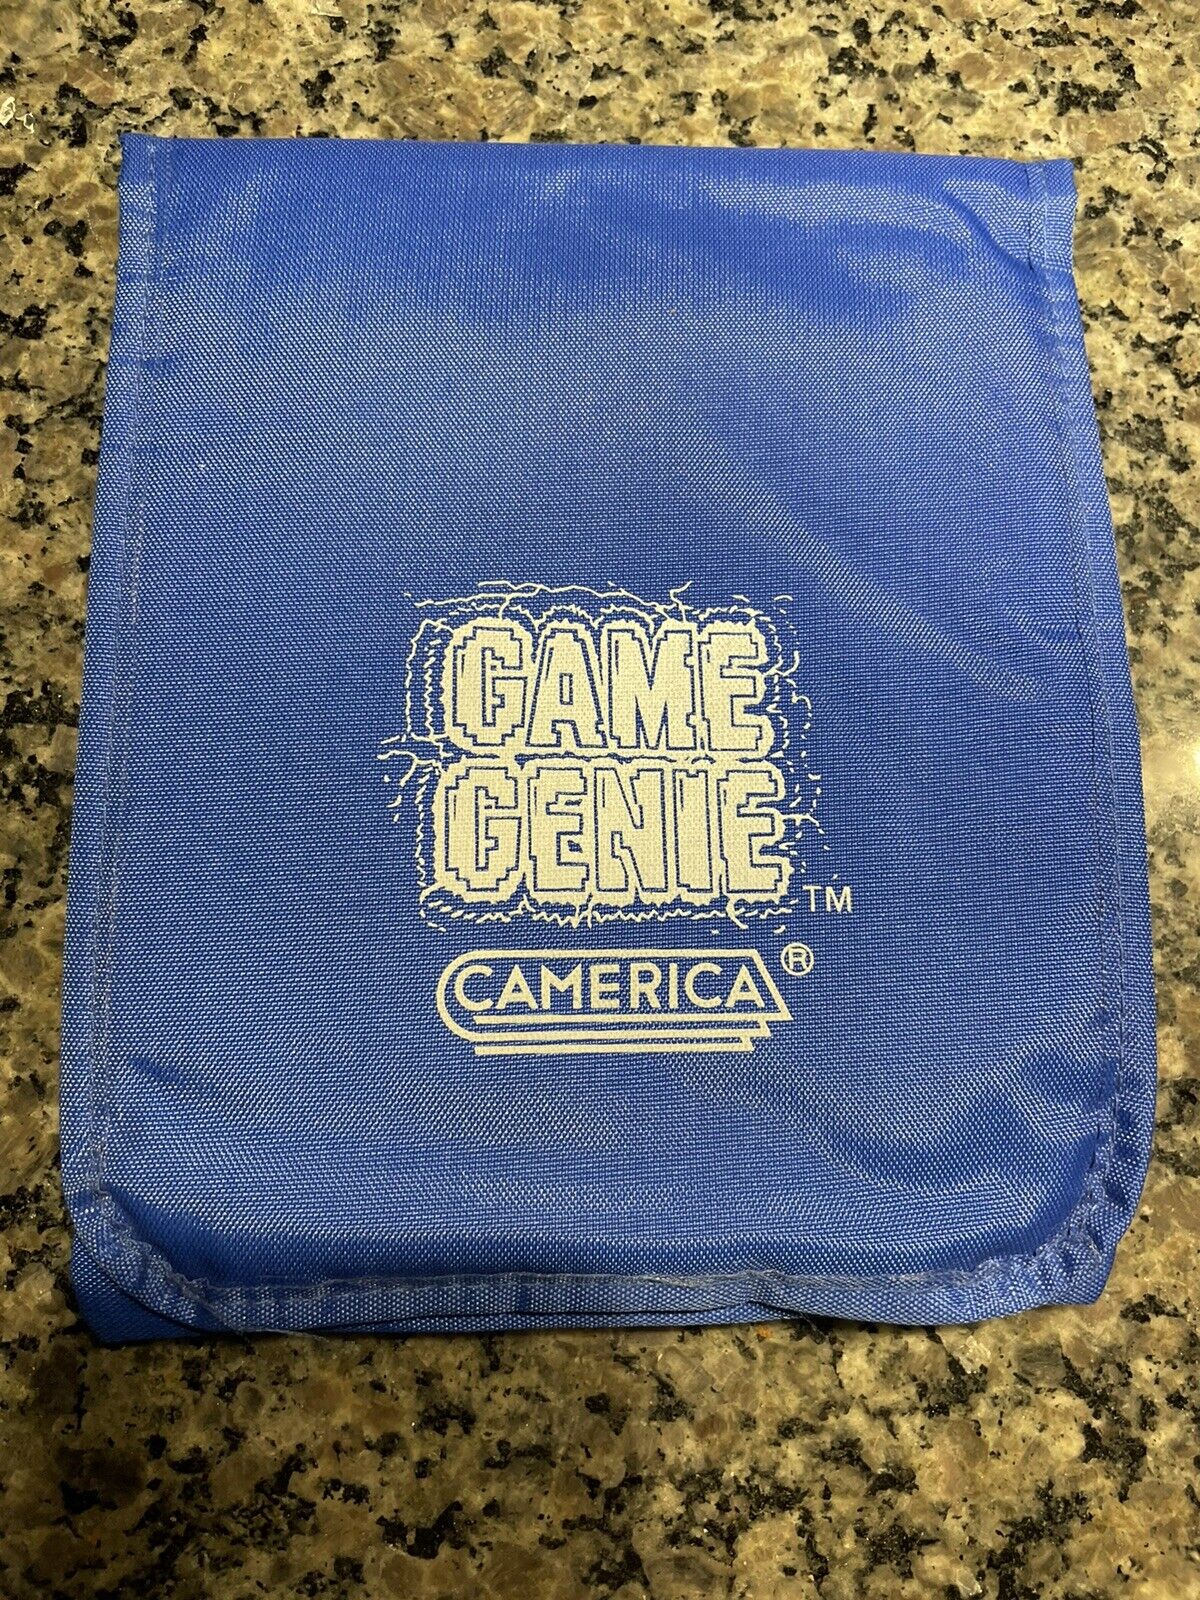 Game Genie Camerica Vintage Carrying Case